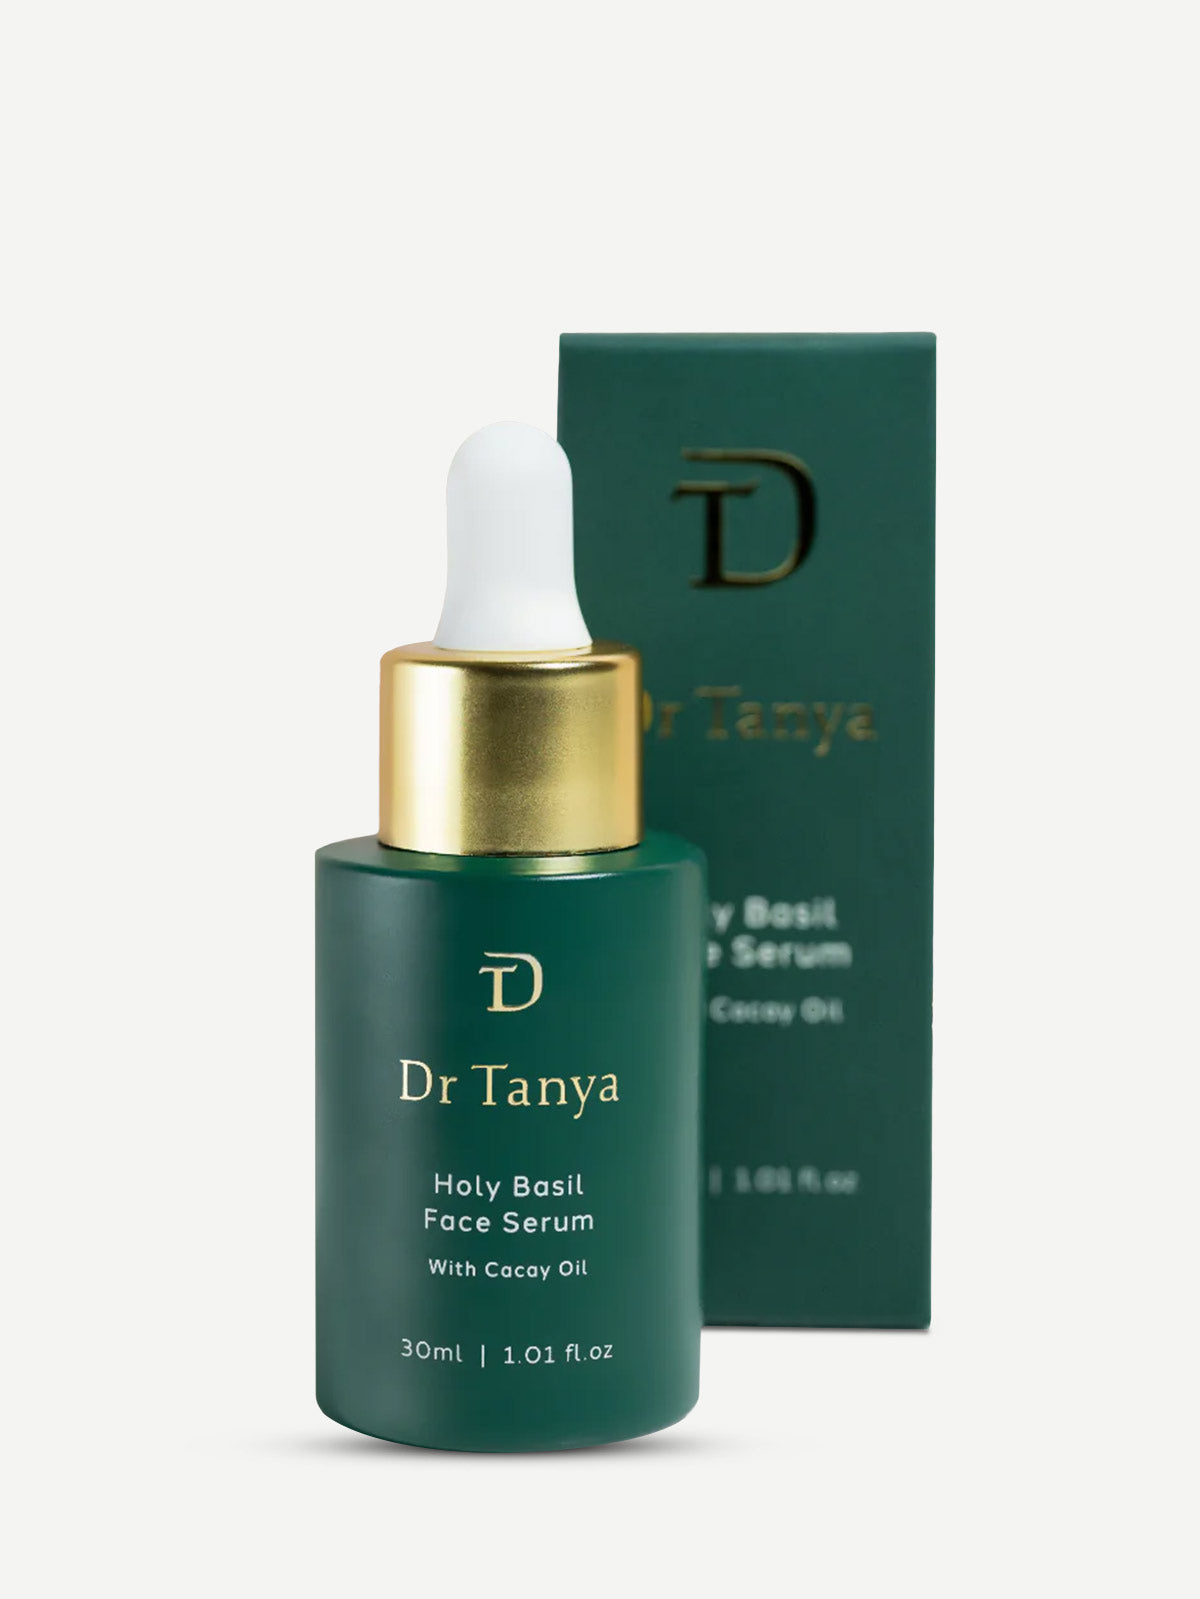 Dr. Tanya - Brightening Holy Basil Face Serum with Holy Basil & Cacay Oil